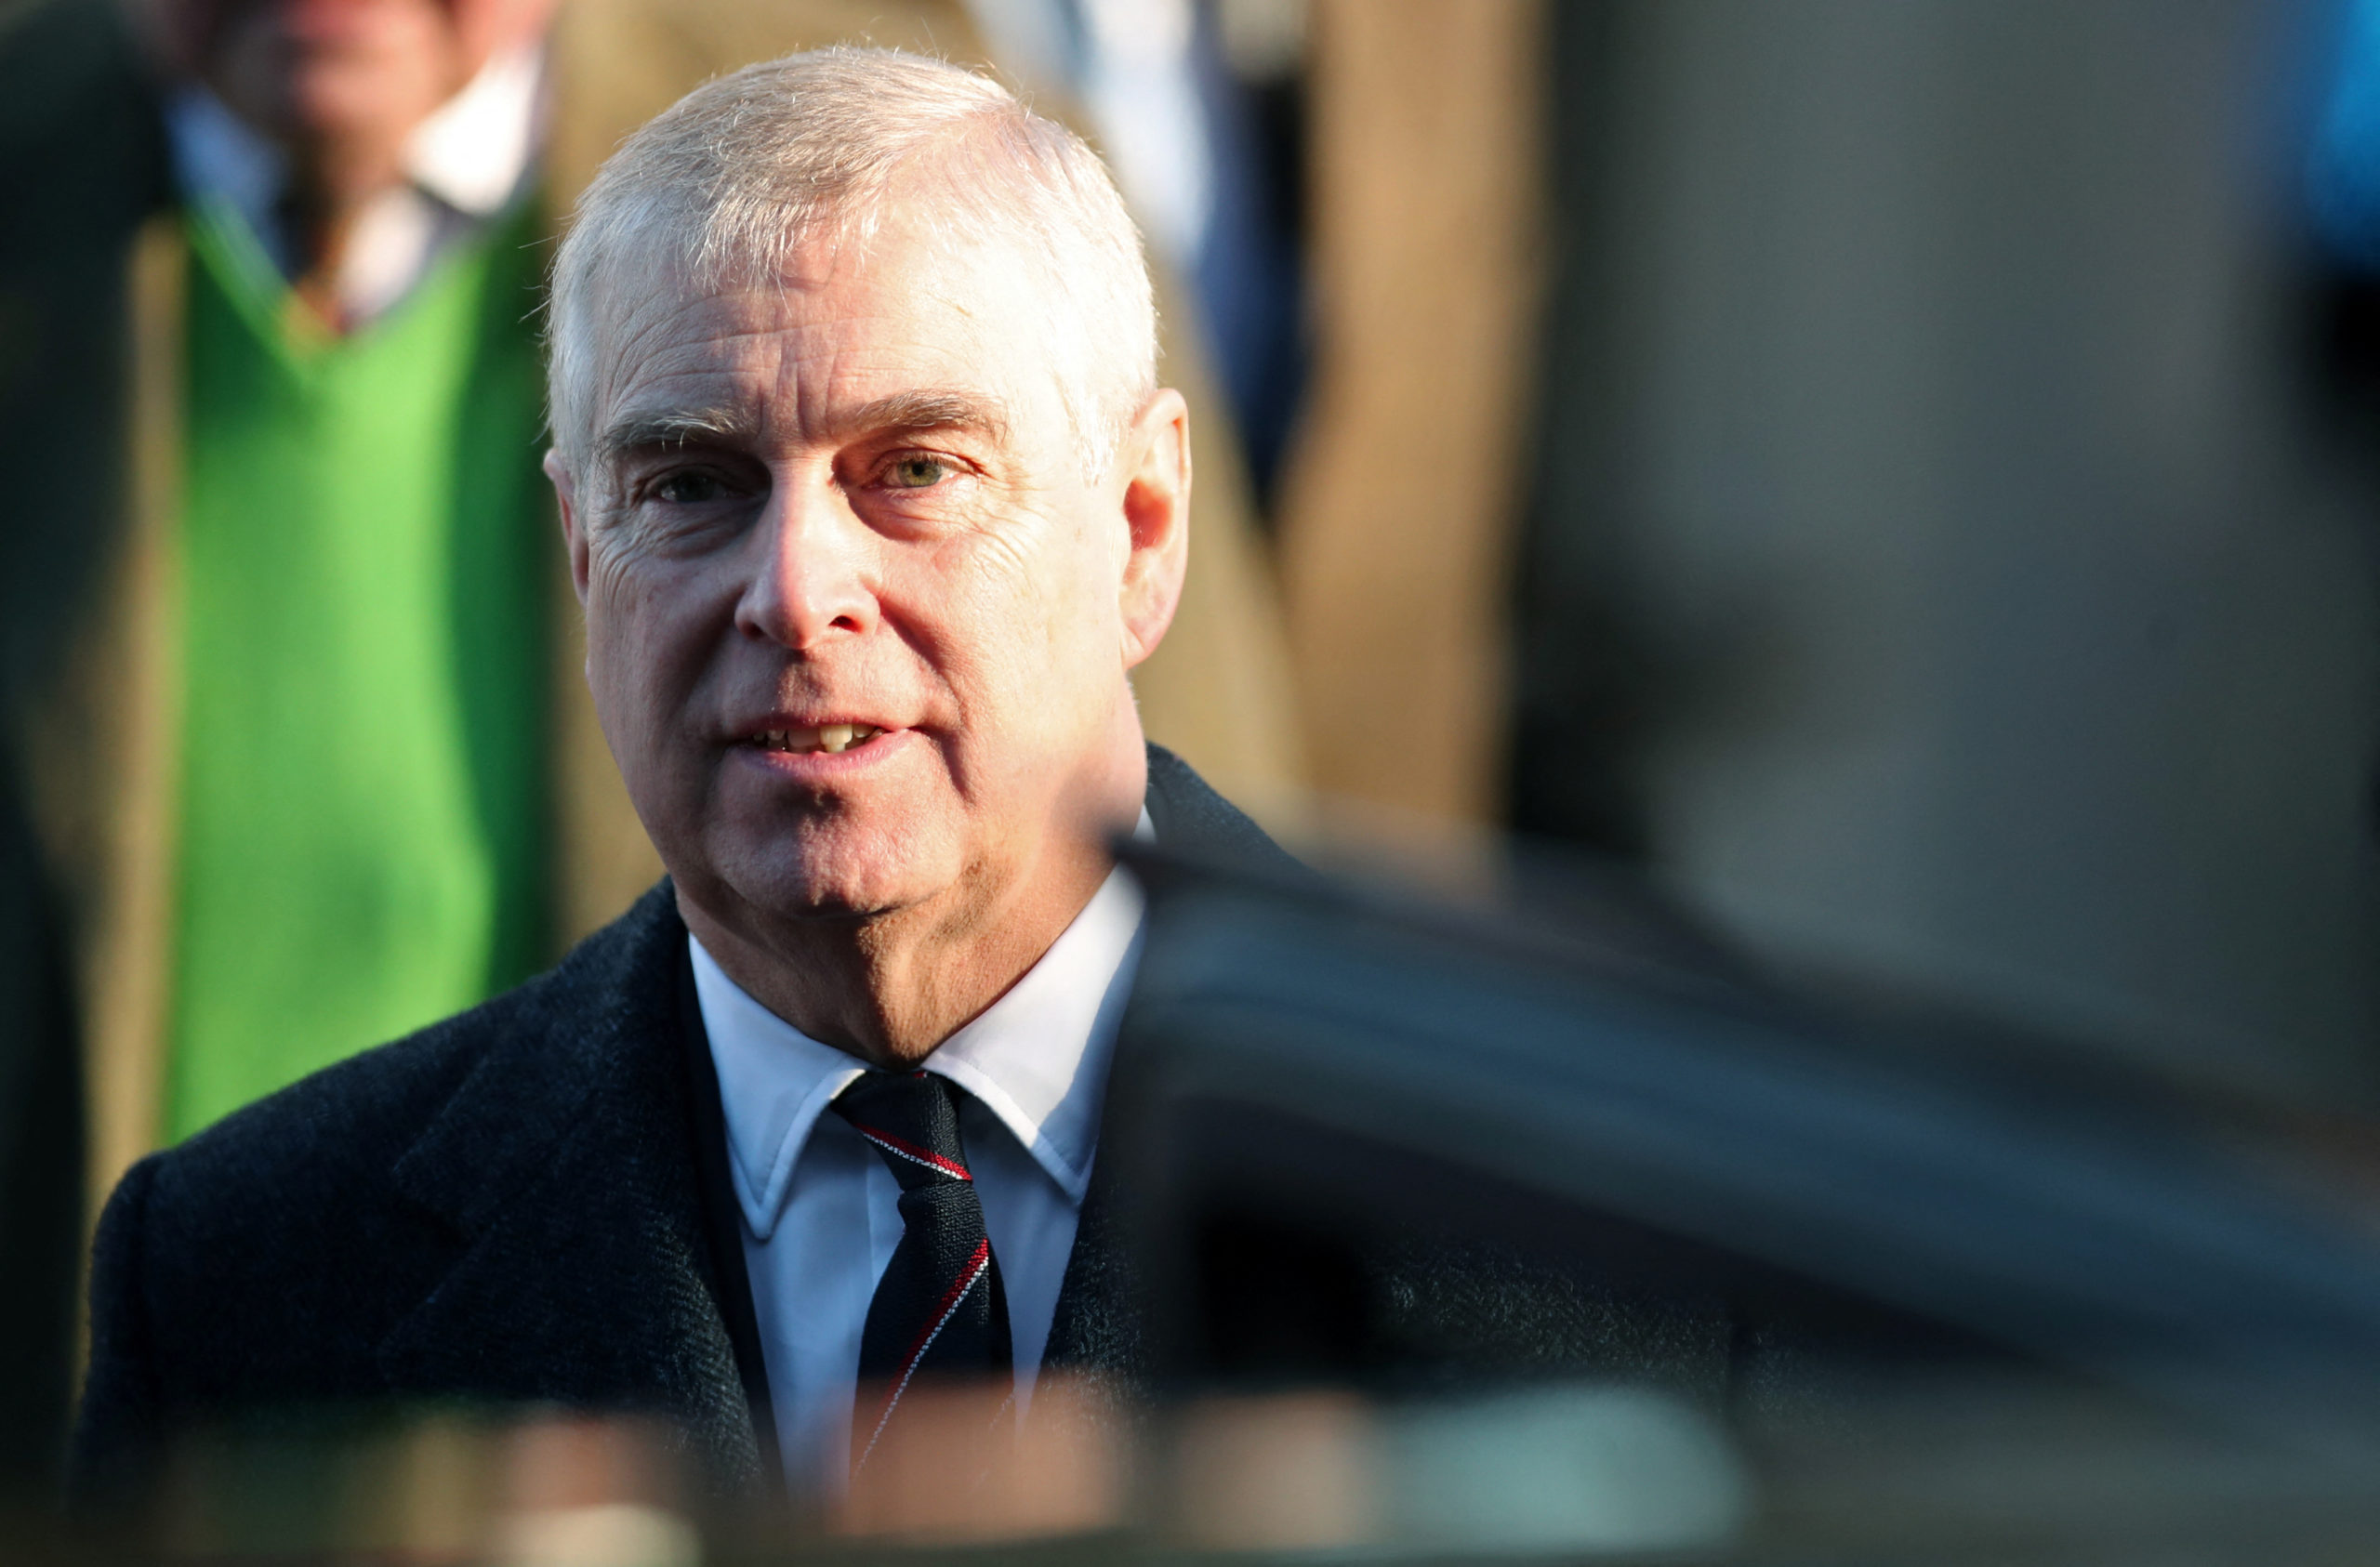 US judge rejects Prince Andrew's bid to dismiss sex abuse accuser's lawsuit